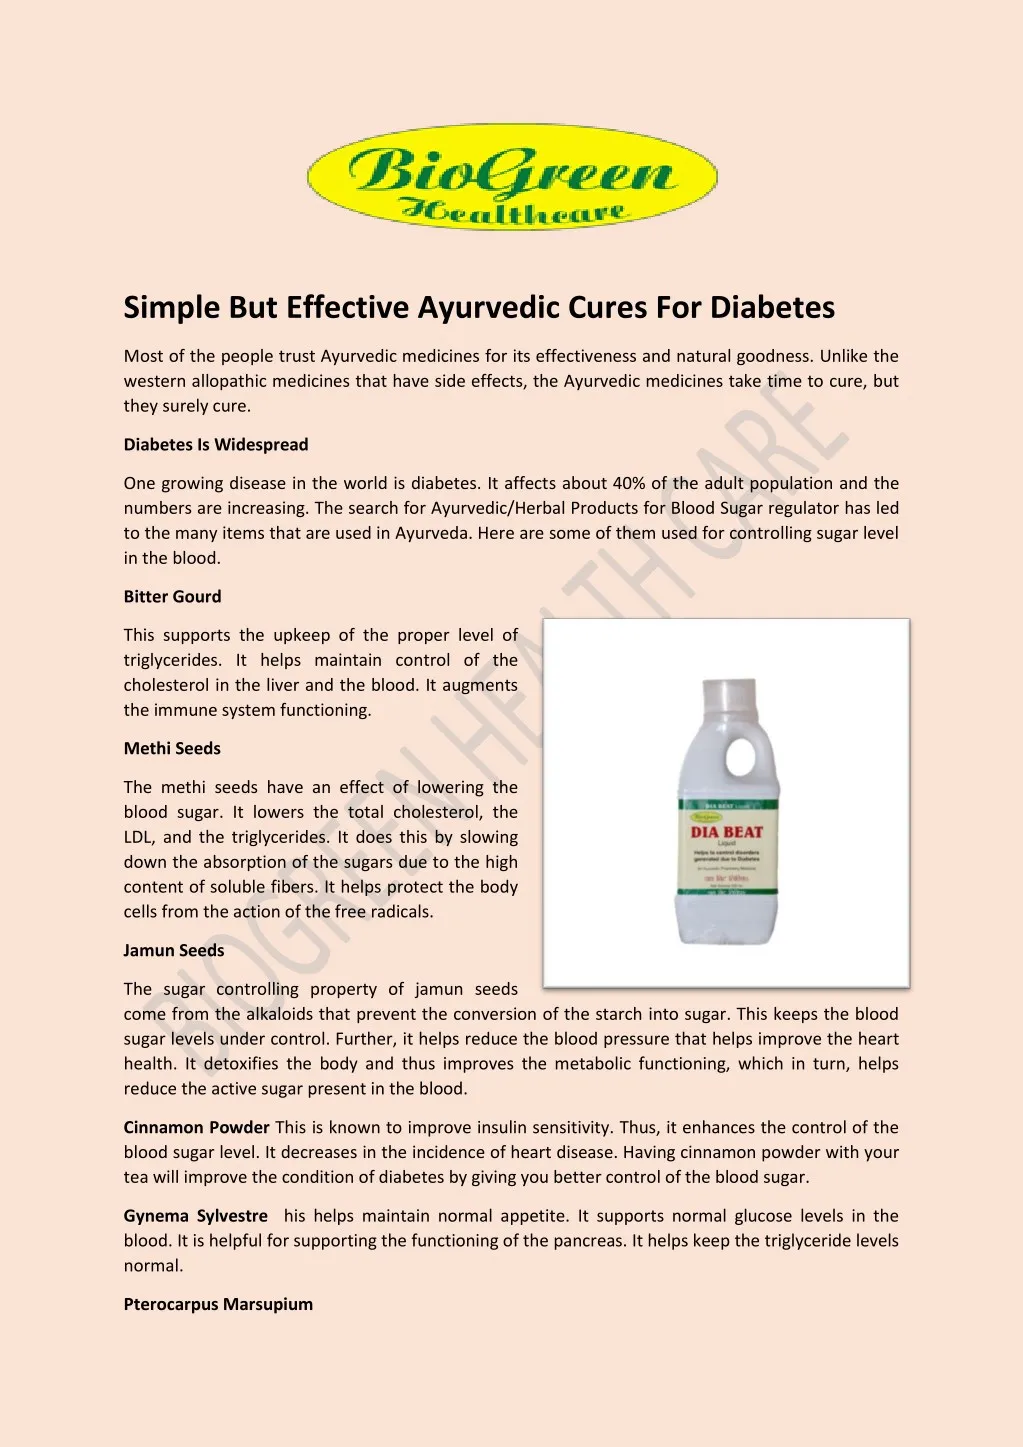 simple but effective ayurvedic cures for diabetes